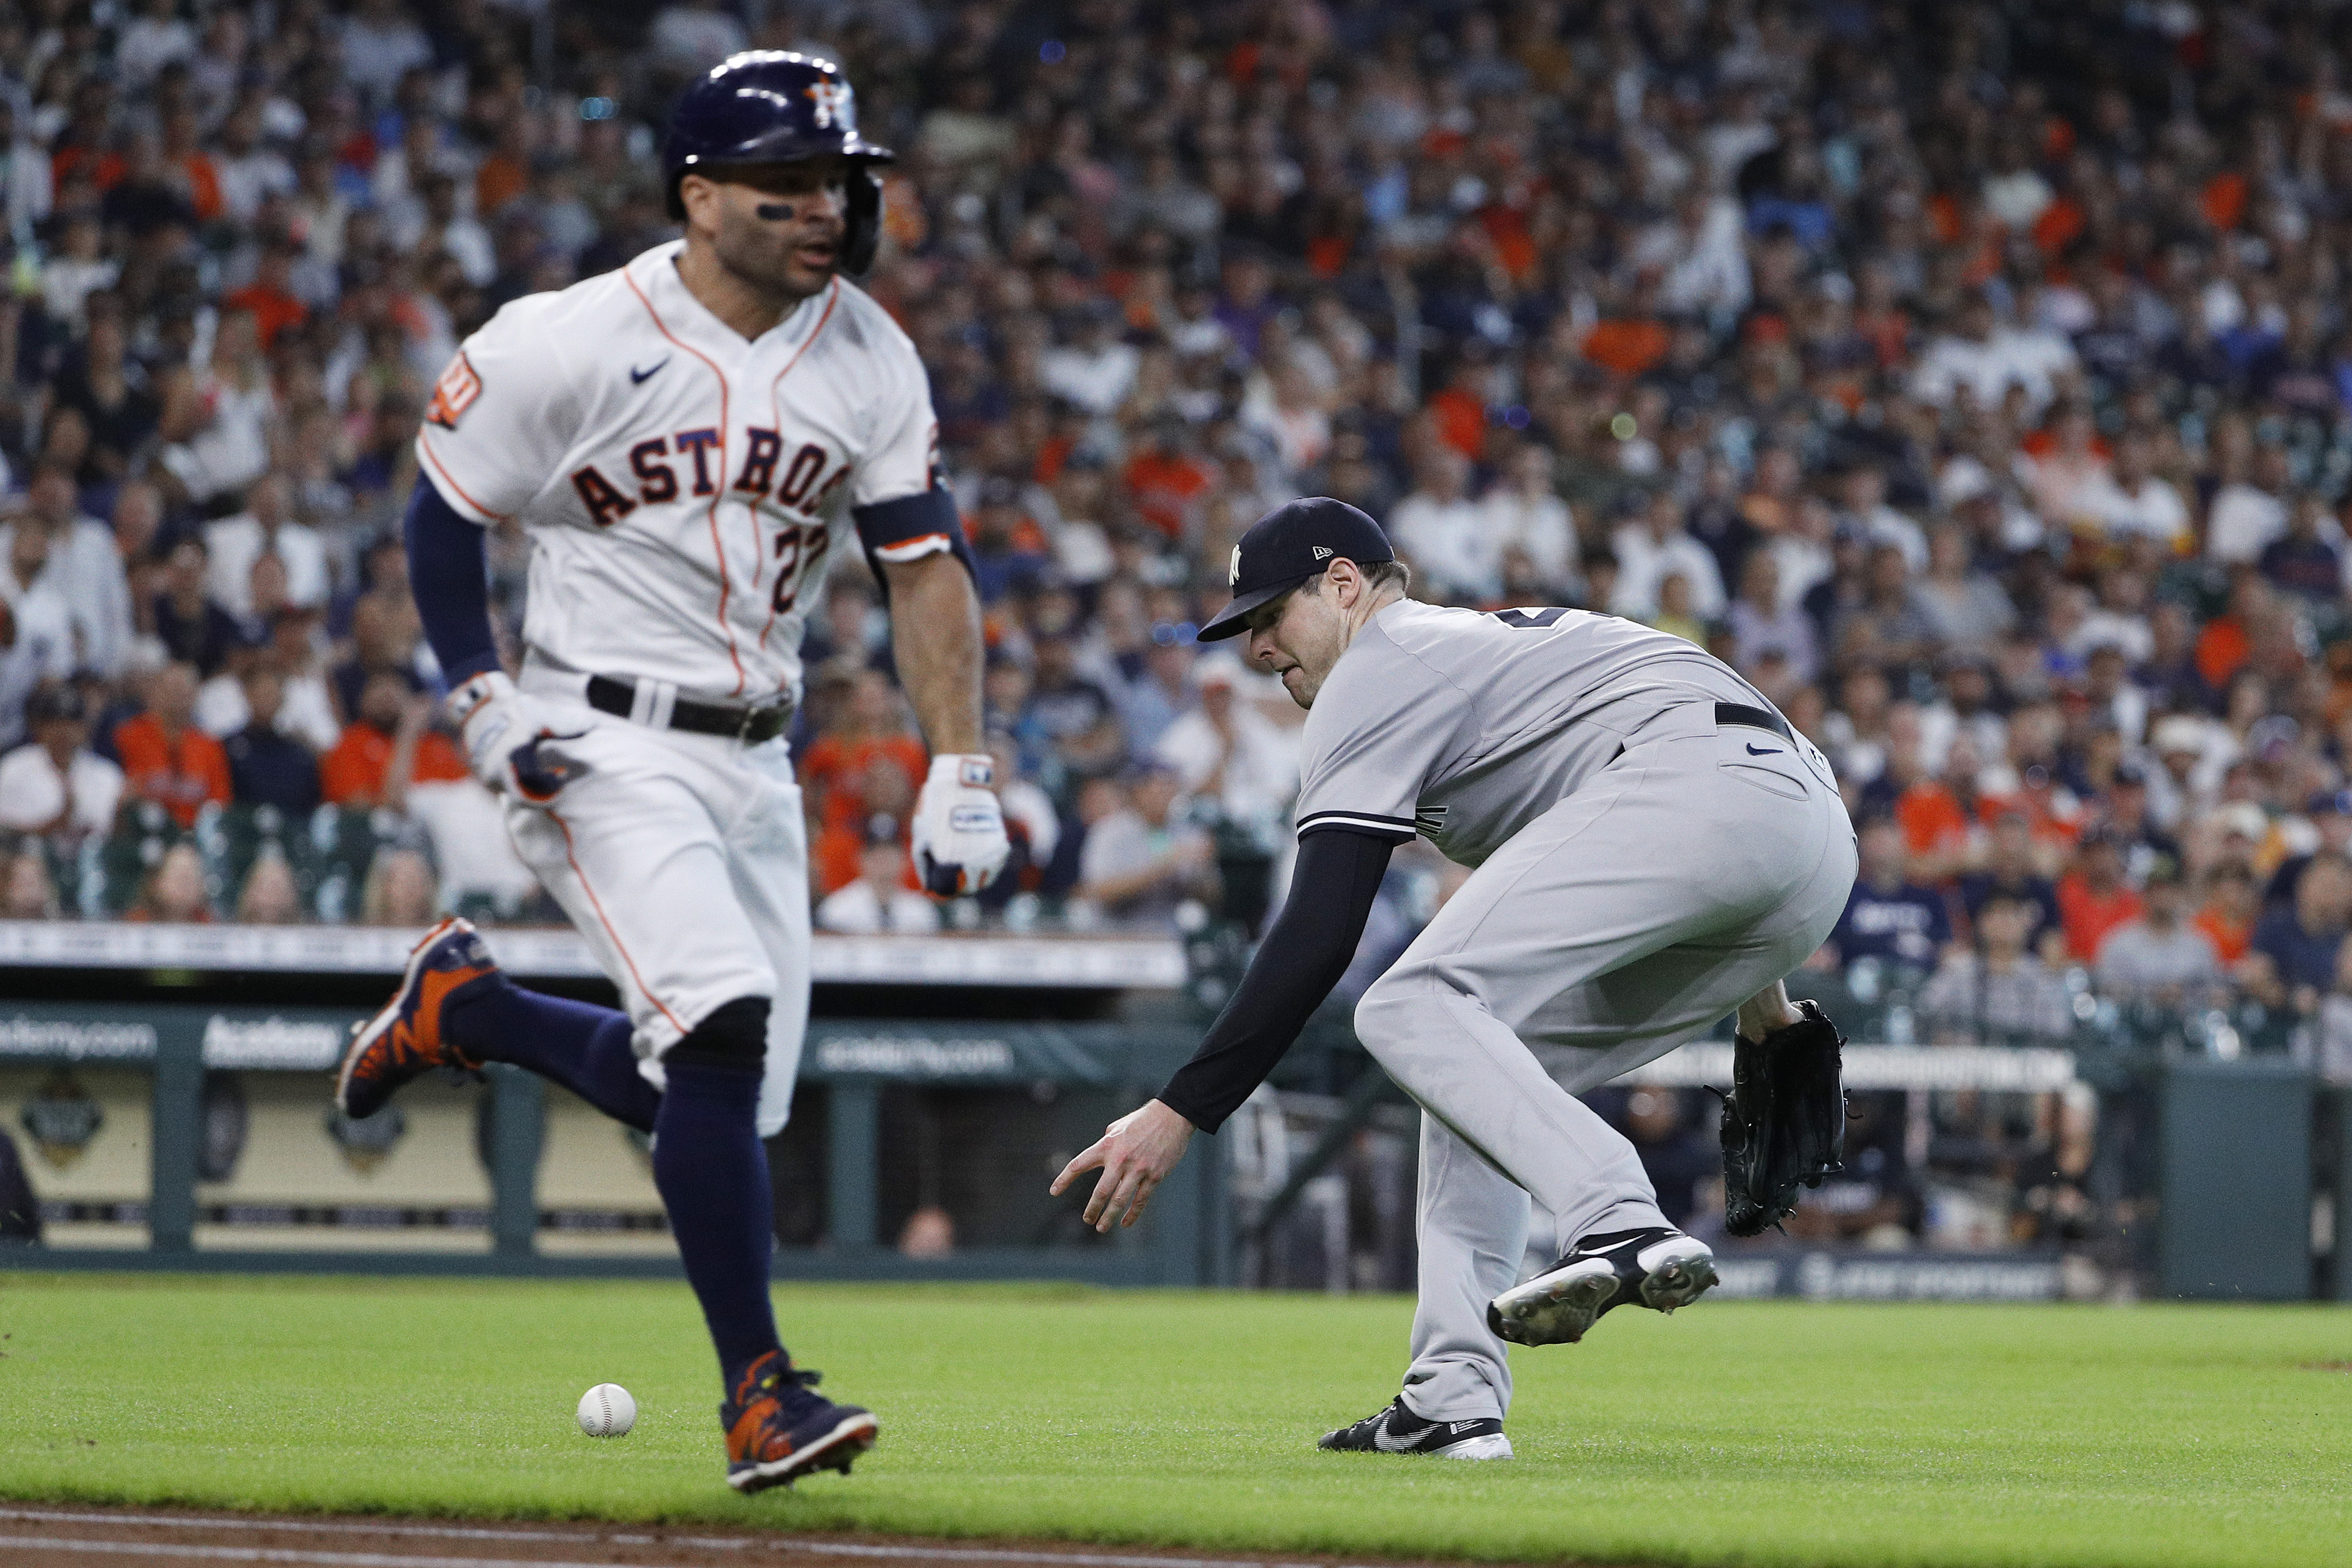 Norwin grad Matijevic homers again in Astros' no-hit win over Yankees